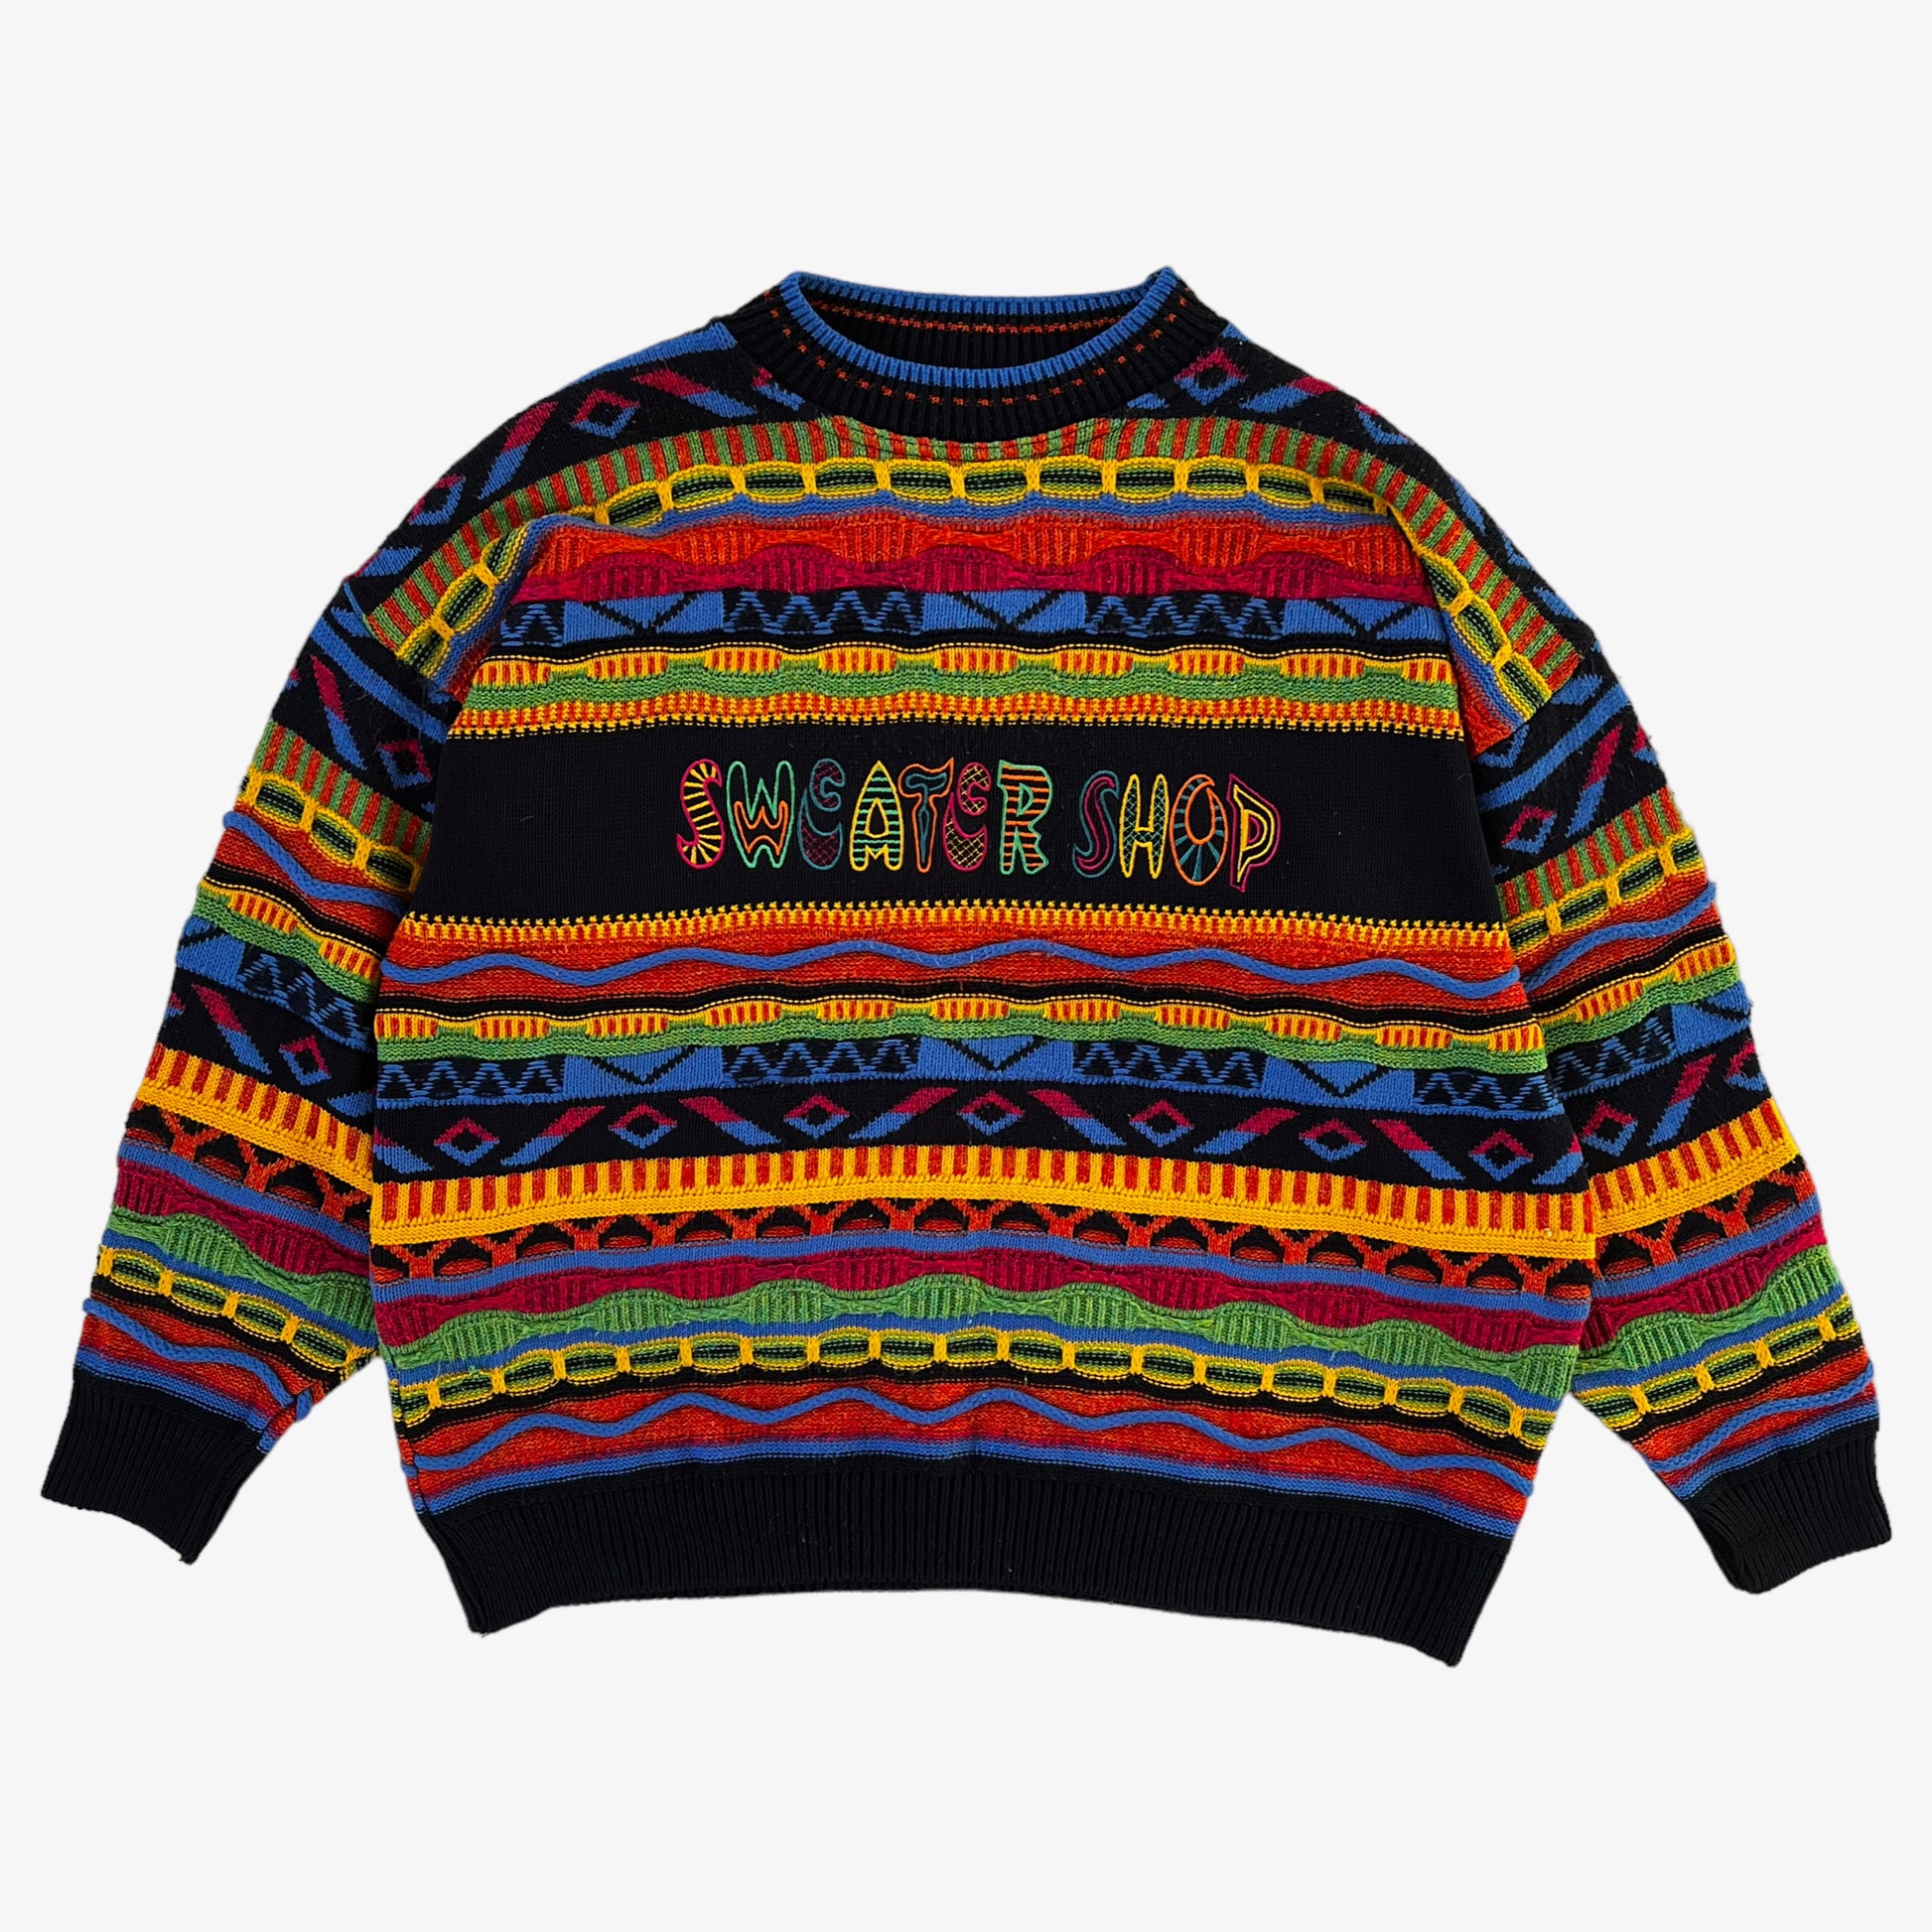 Vintage 90s The Sweater Shop 3D Textured Colourful Knitted Jumper - Casspios Dream